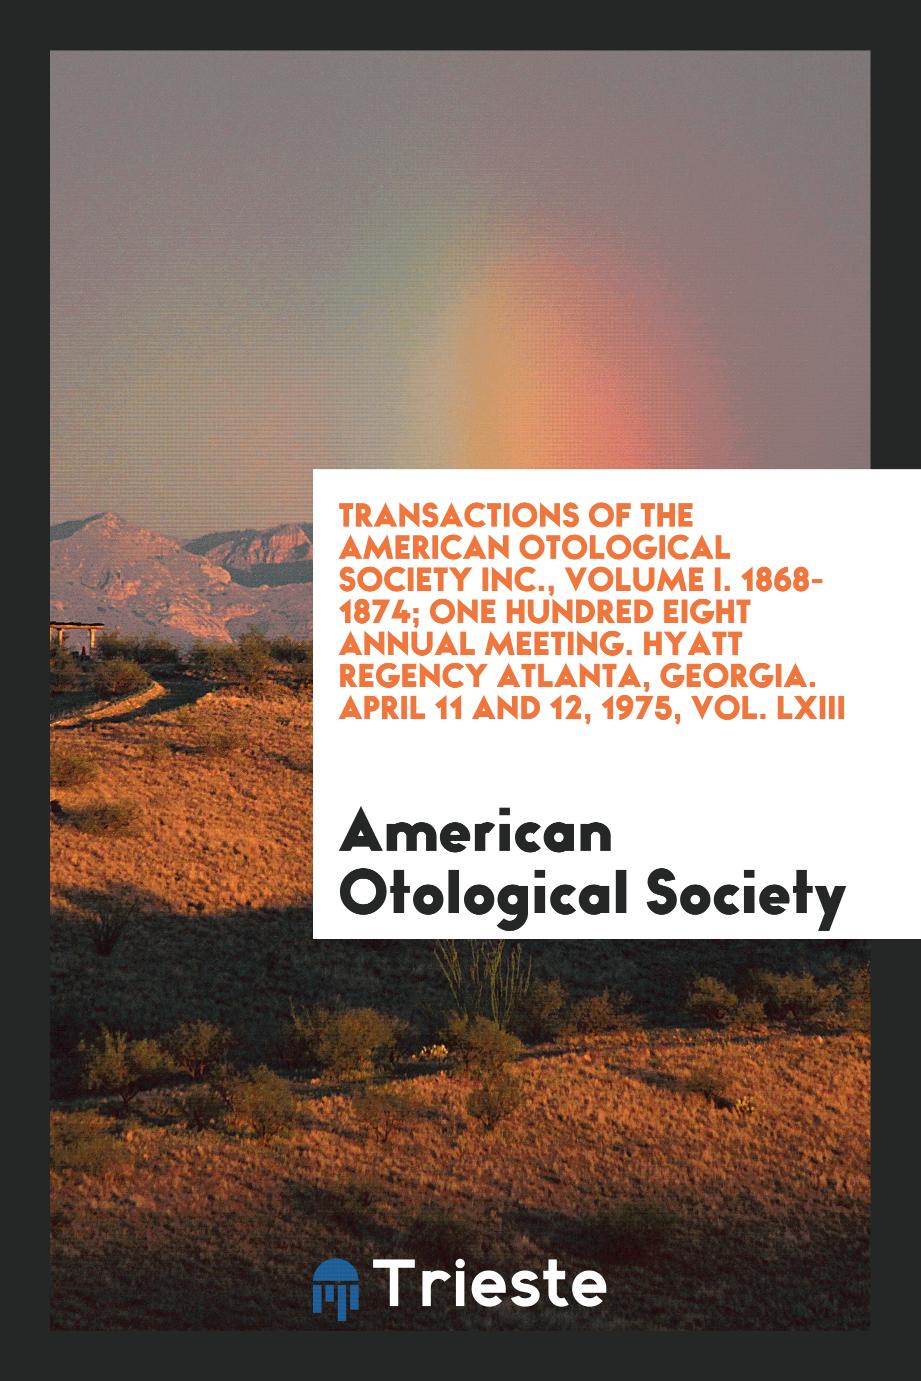 Transactions of the American Otological Society Inc., Volume I. 1868-1874; One Hundred Eight Annual Meeting. Hyatt Regency Atlanta, Georgia. April 11 and 12, 1975, Vol. LXIII